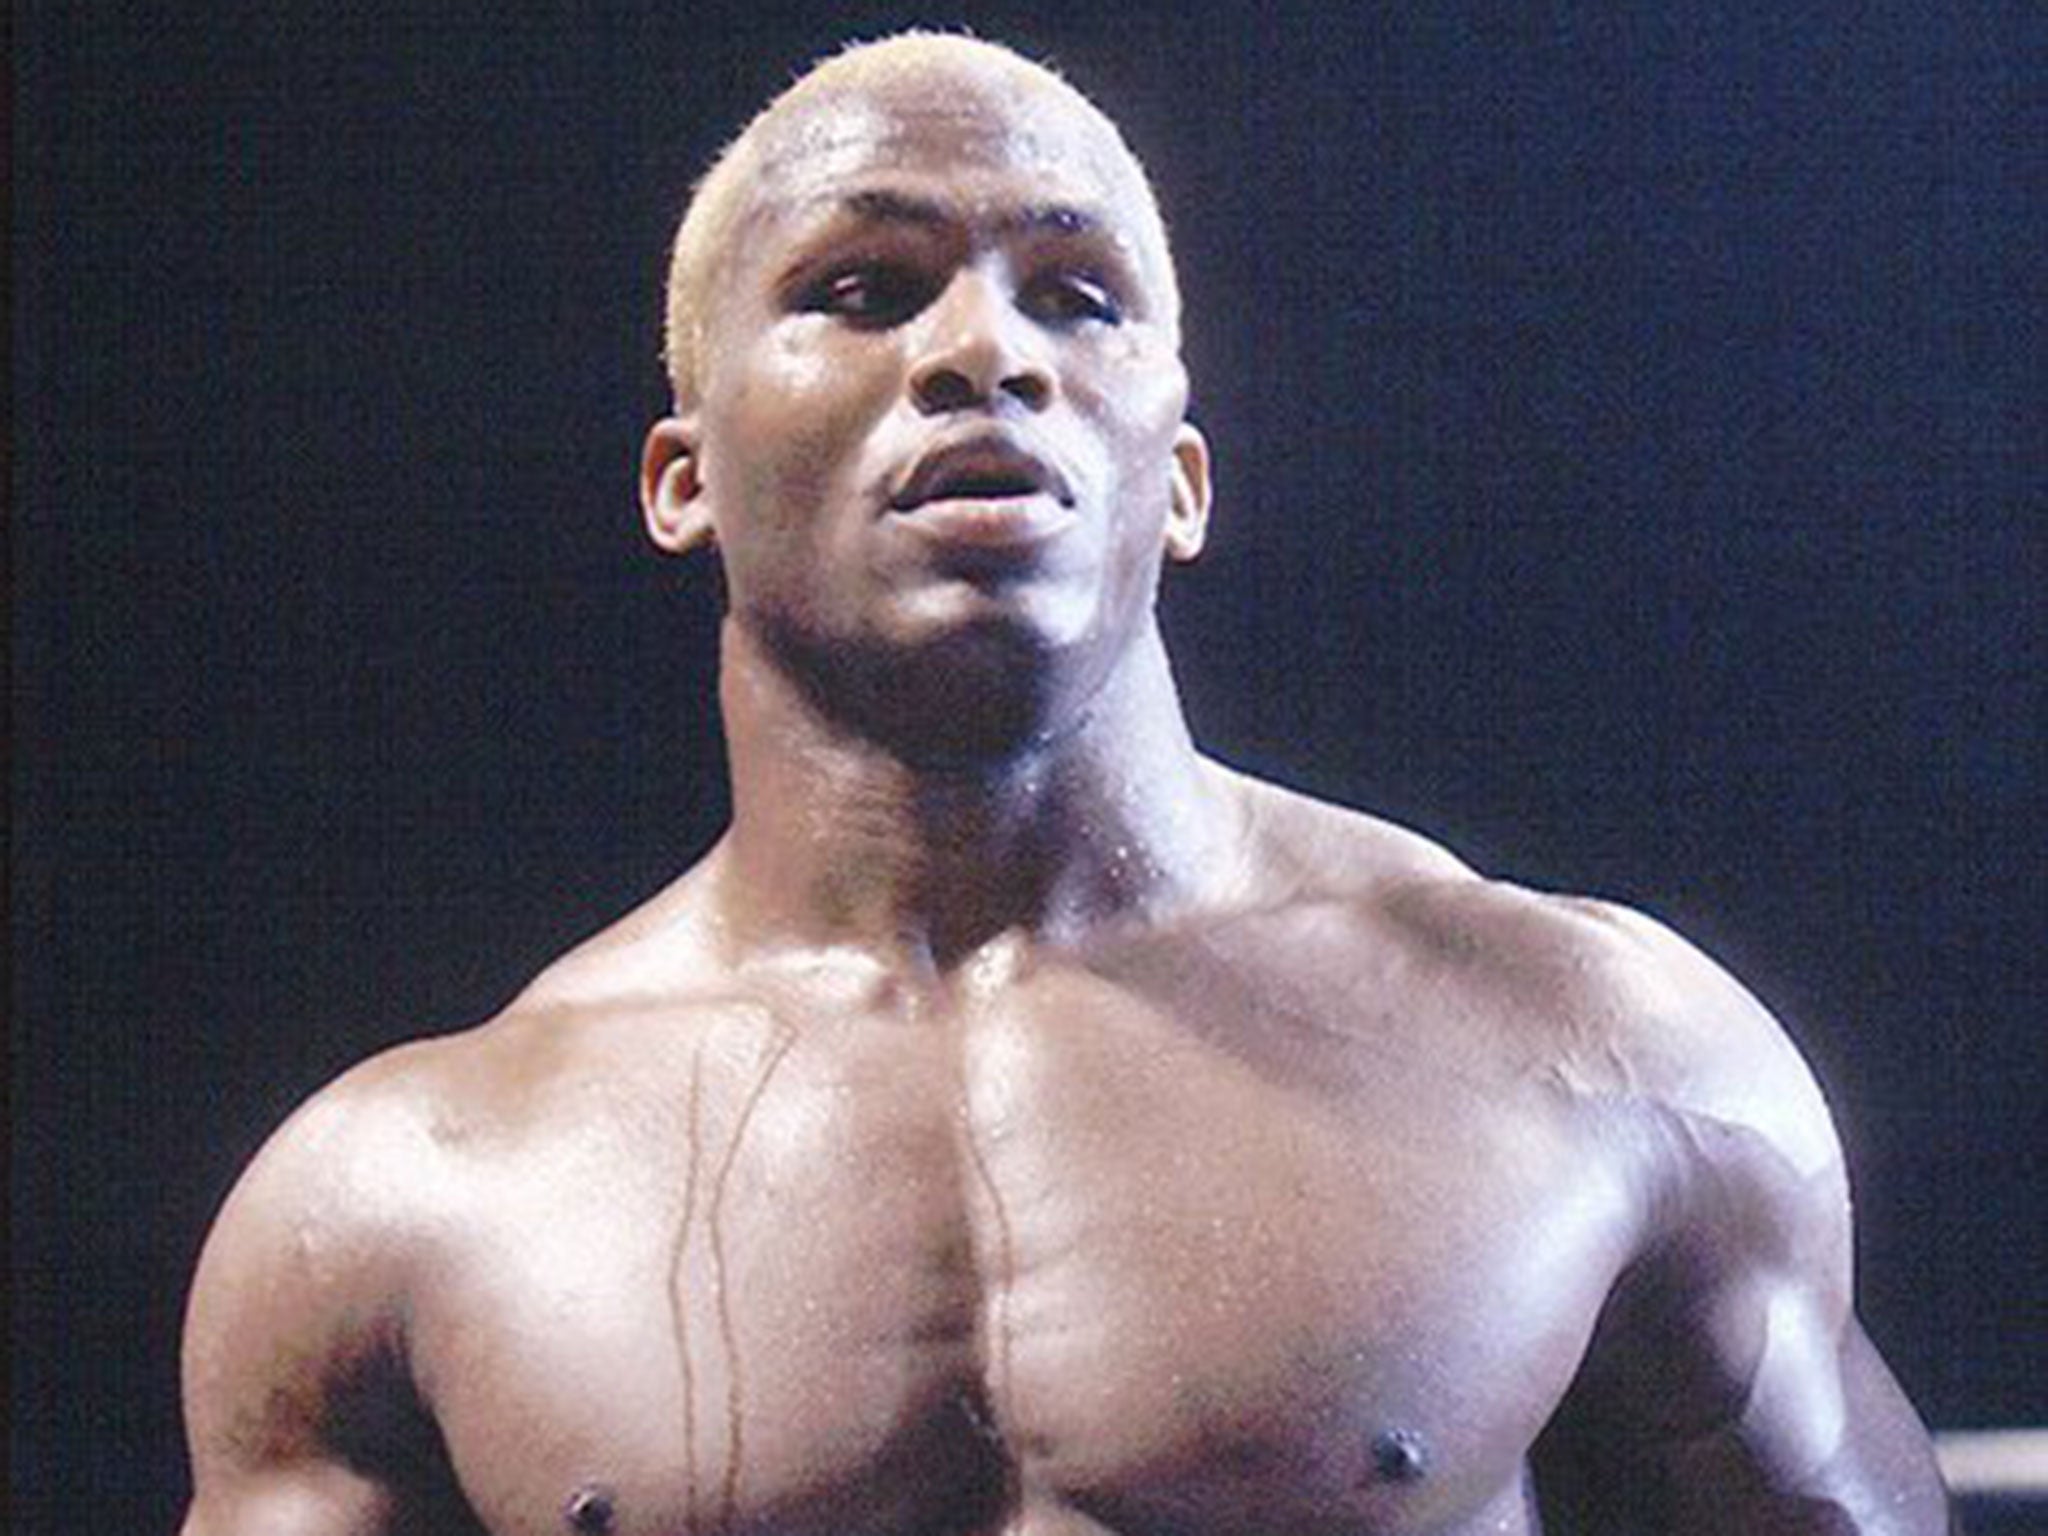 Former UFC heavyweight champion Kevin Randleman has died, aged 44